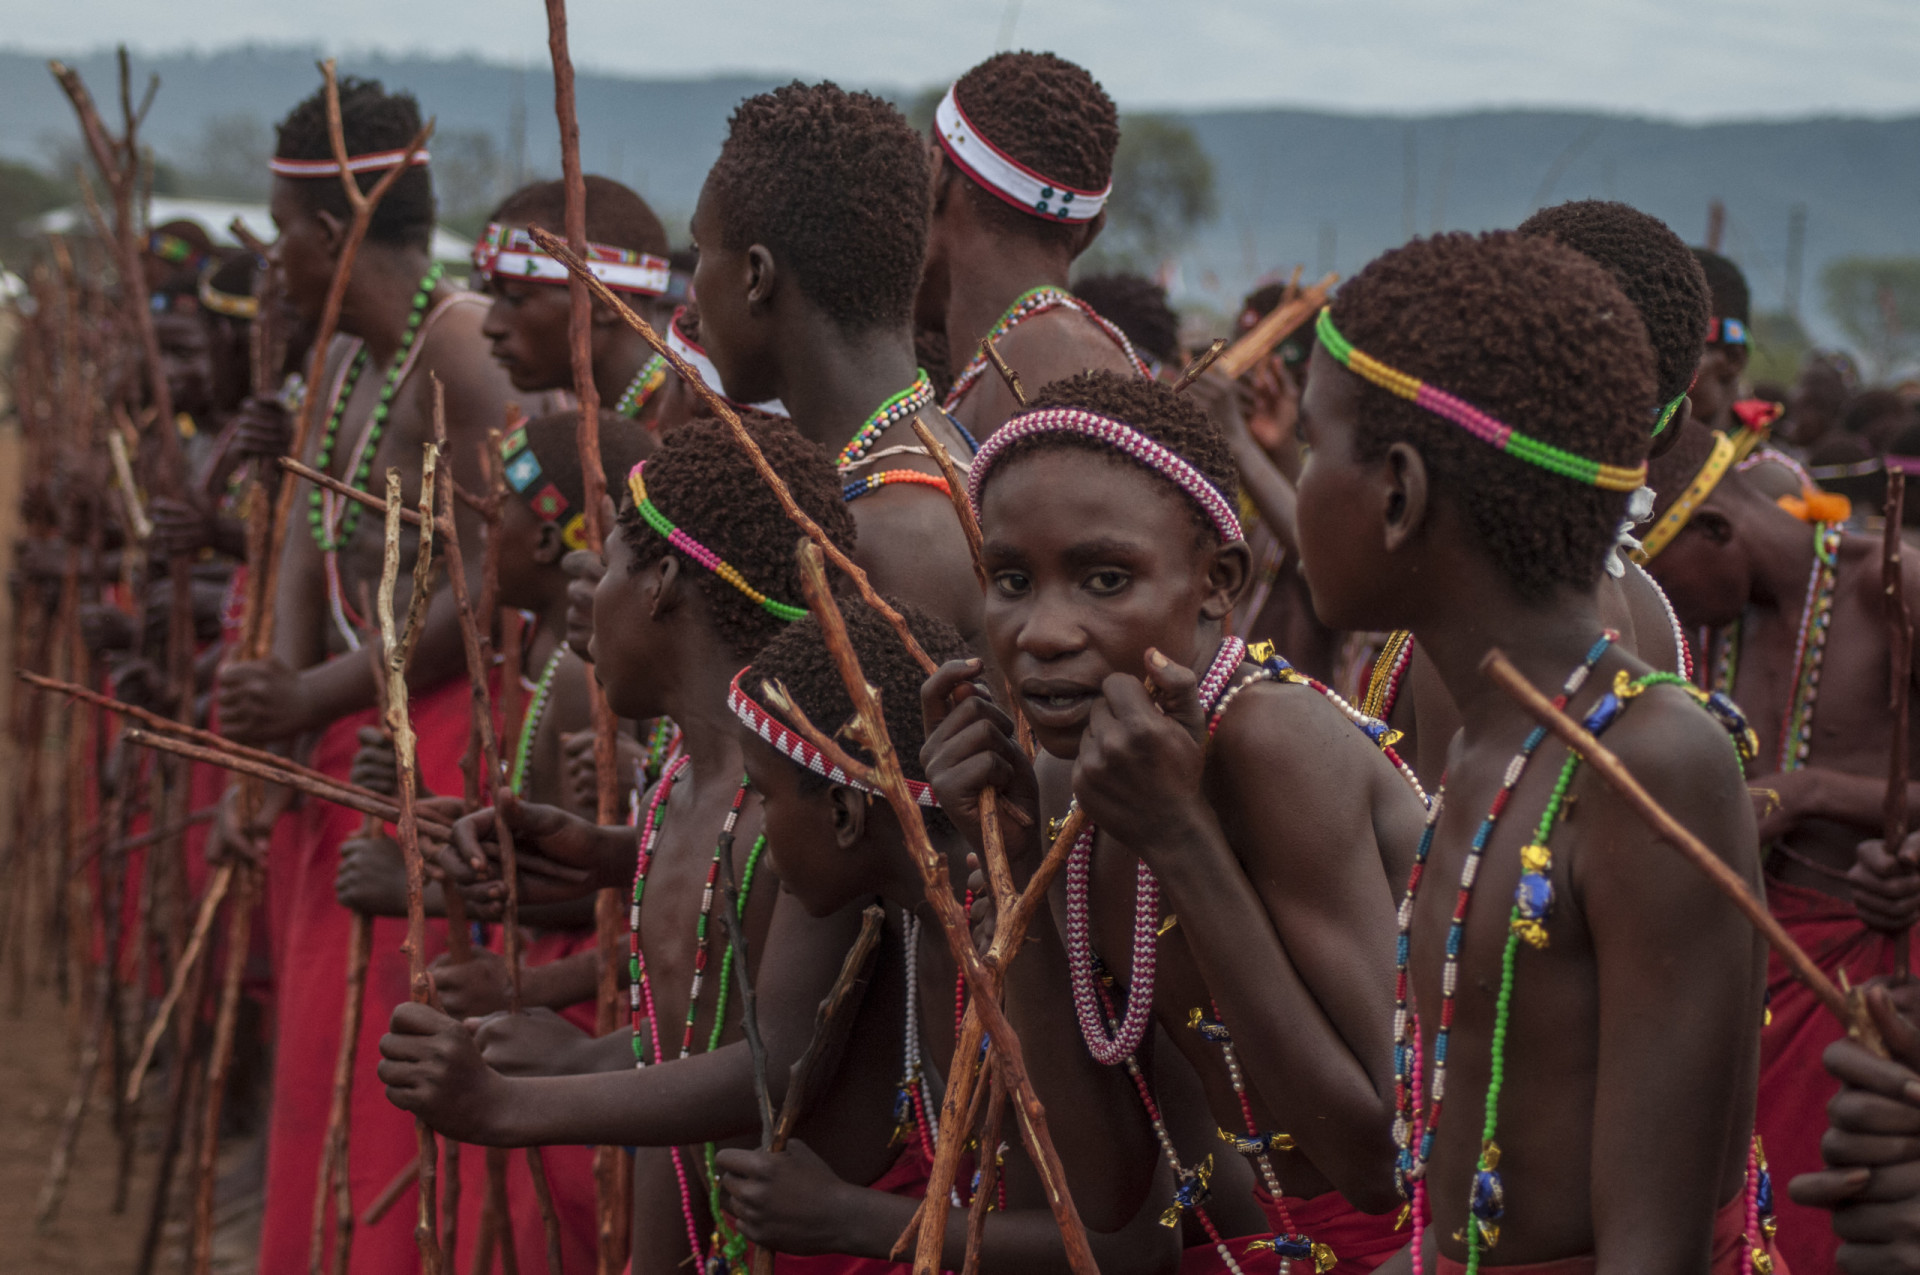 <p>The dance that Tsonga people perform is called <em>xibelani</em>, which is performed by the women and dates back as early as the 14th century.</p><p>You may also like:<a href="https://www.starsinsider.com/n/341903?utm_source=msn.com&utm_medium=display&utm_campaign=referral_description&utm_content=706691en-us"> Ghost stories: celebrities reveal their paranormal experiences</a></p>